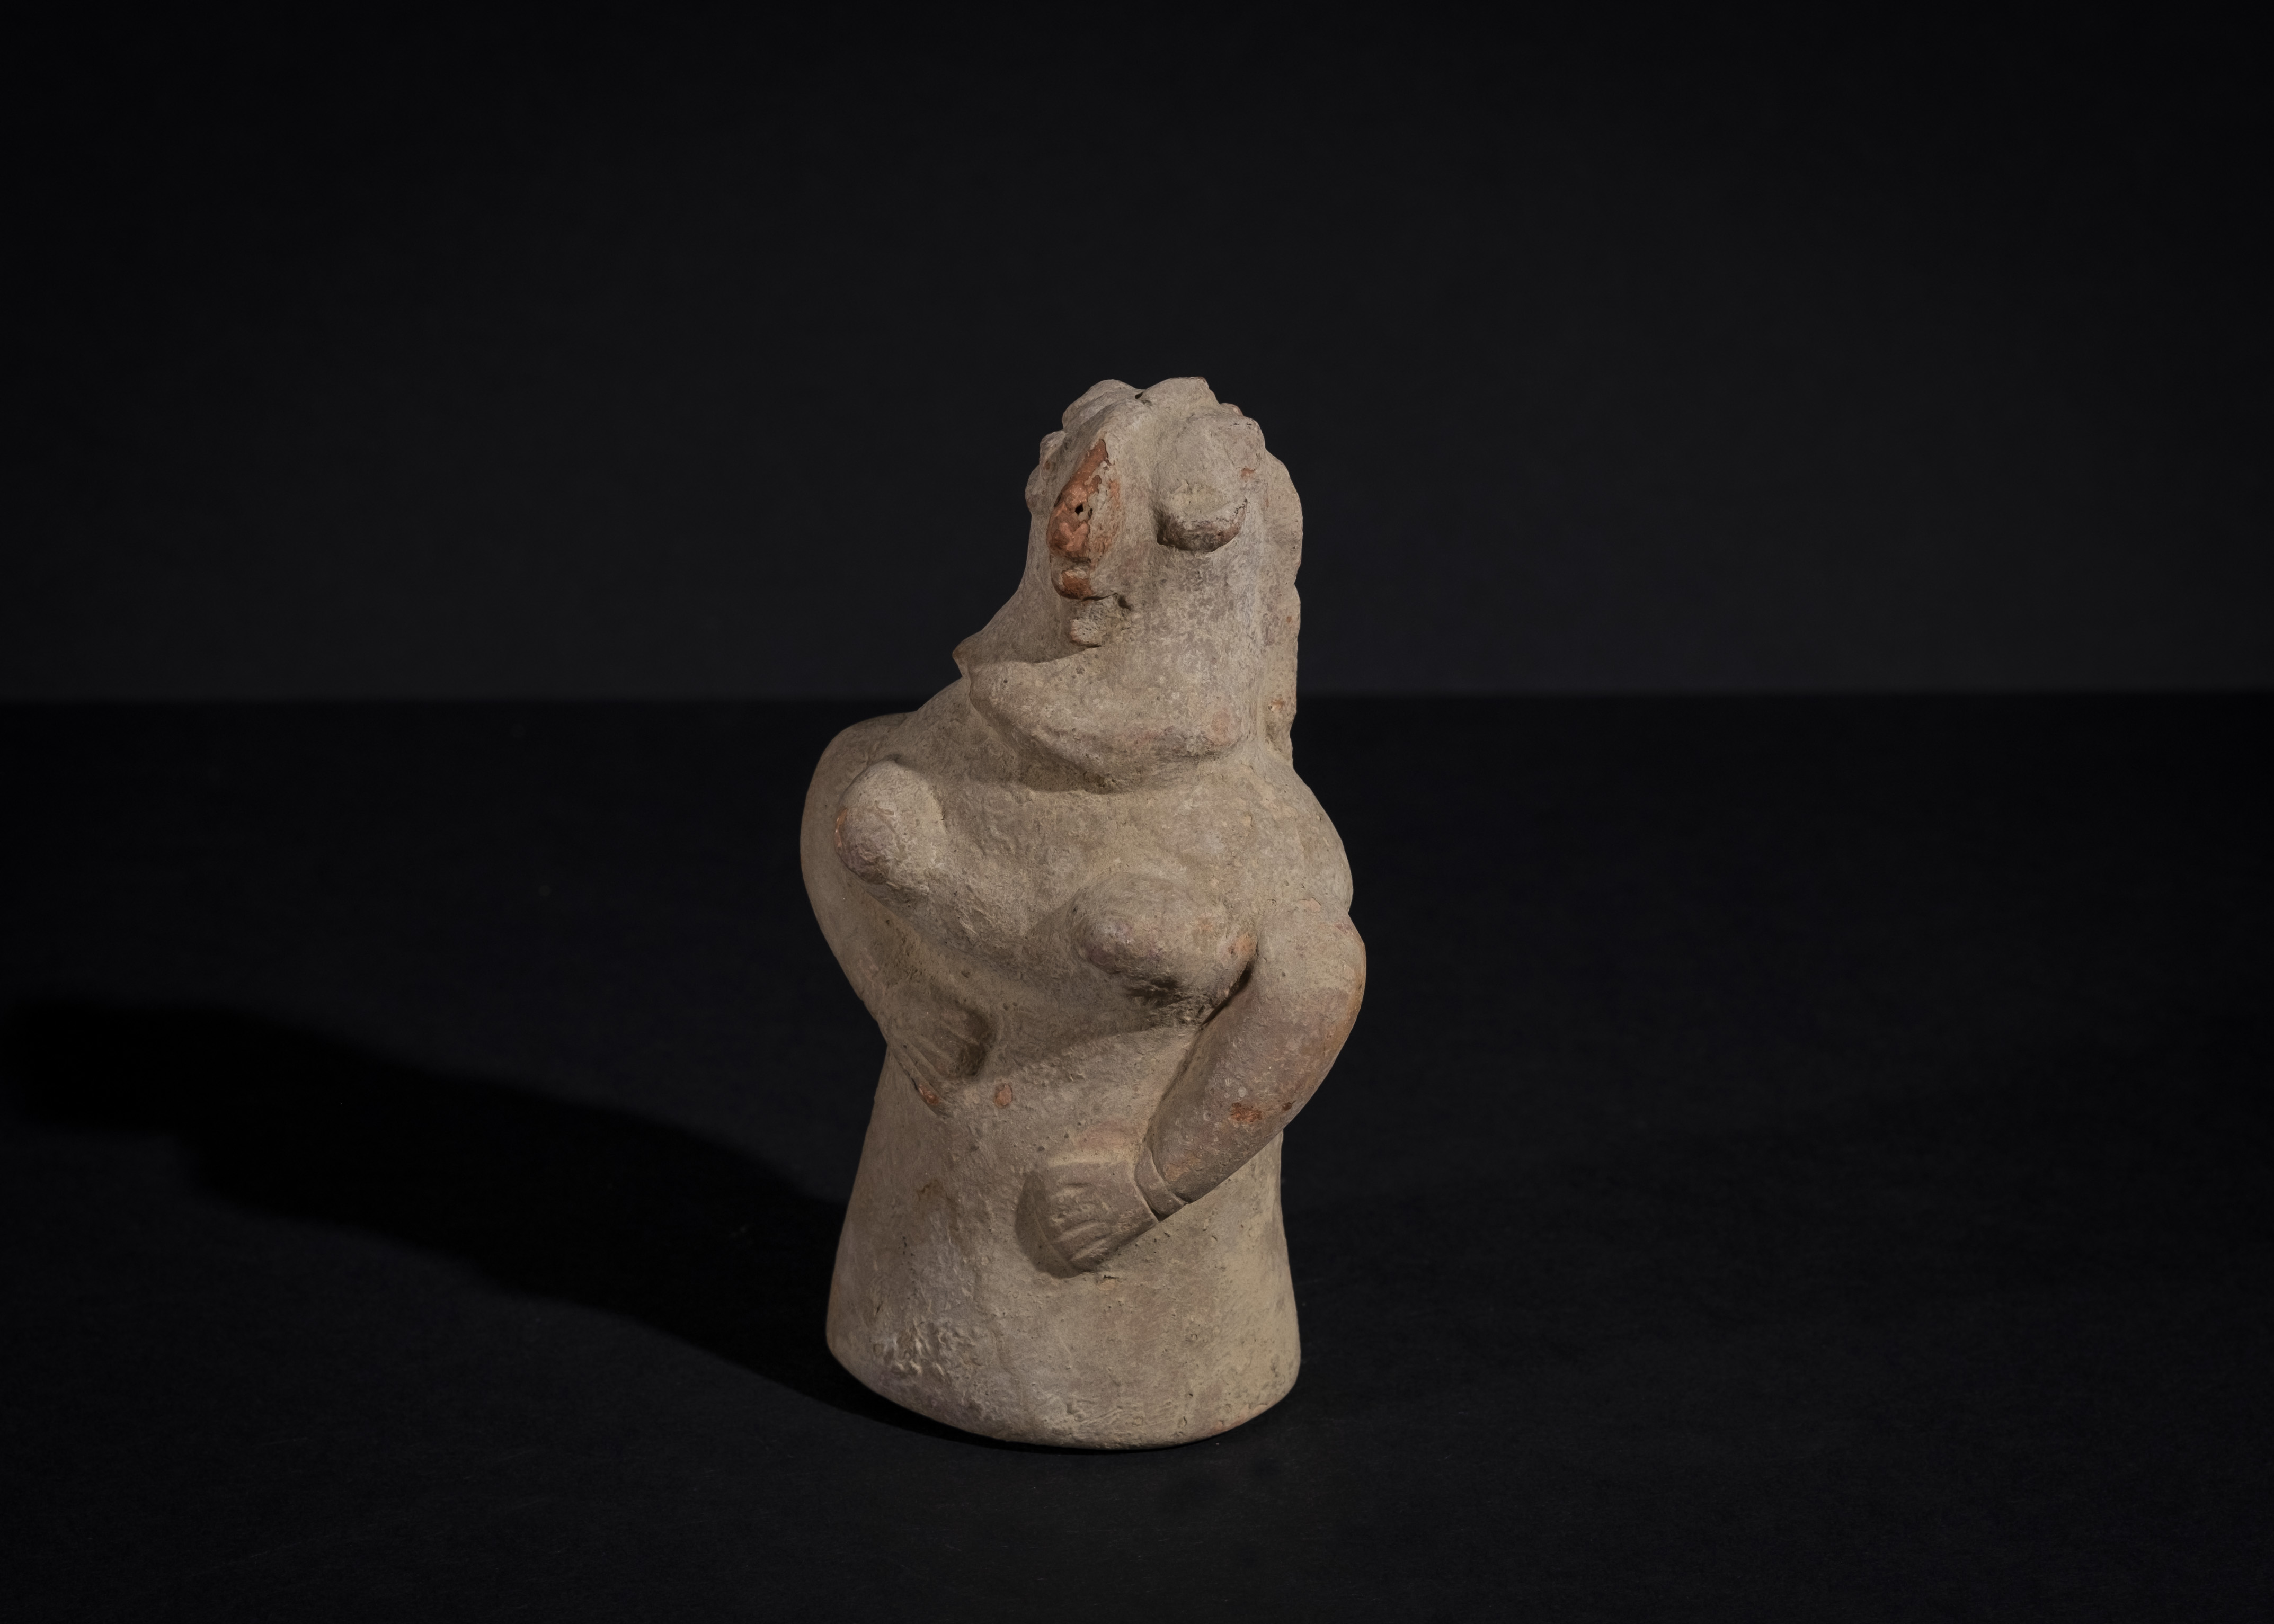 AN INDUS VALLEY HARAPPA TERRACOTTA FIGURE, POSSIBLY REPRESENTING MOTHER EARTH, 2ND MILLENIUM B.C